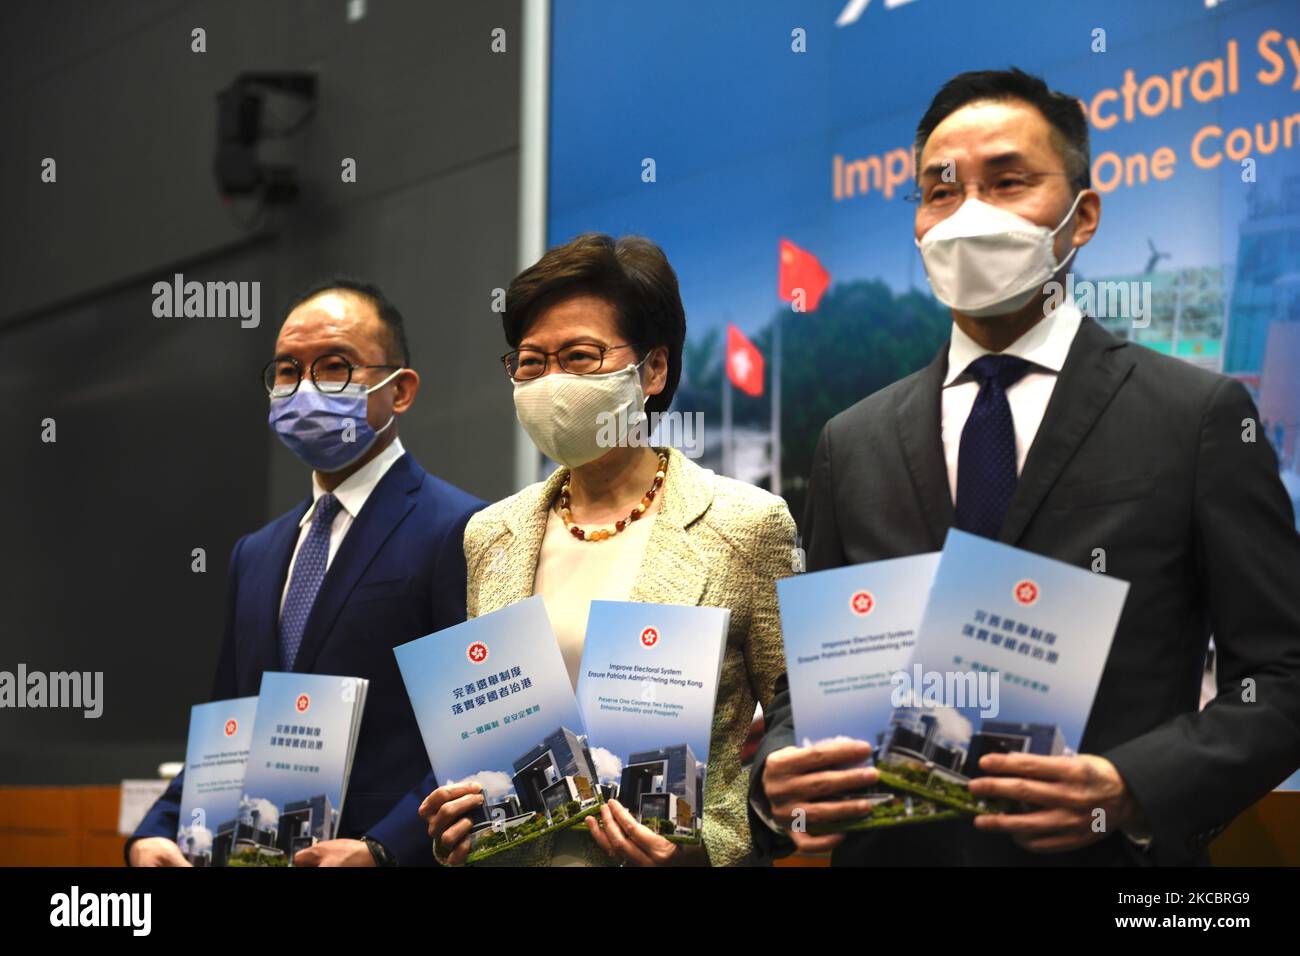 From Left to Right Mr. Eric Tsang Secretary for Constitutional and Mainland Affairs , Ms Carrie Lam Hong Kong Chief Executive , Mr Roy Tang Permanent Secretary for Constitutional and Mainland Affairs, holds a booklet while posing for a photo before a press conference in Hong Kong, Tuesday, March 30, 2020. The National People's Congress Standing Committee (NPCSC) on Tuesday approved amendments to annexes 1 and 2 of Hong Kong's Basic Law to pave the way for a drastic overhaul of the SAR's electoral system, local member Tam Yiu-chung said One of the major revamps includes expanding the role of th Stock Photo